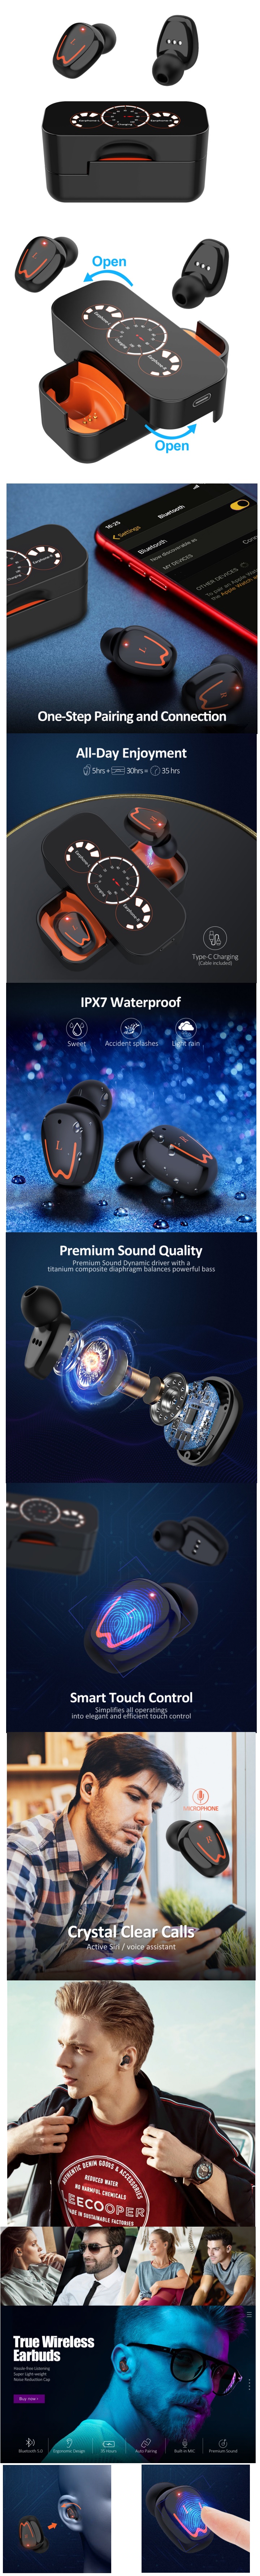 V1 TWS Earbuds, BES Chipset Wireless Earbuds, V1 Wireless Earphone, V1 Earphone Manufacturer, BES TWS Earbuds, Bluetooth 5.0 Earphone ANC Wireless Earbuds, V1 Wireless Earbuds, Pivated Model Wireless Earbuds, Private Design TWS Earphone,